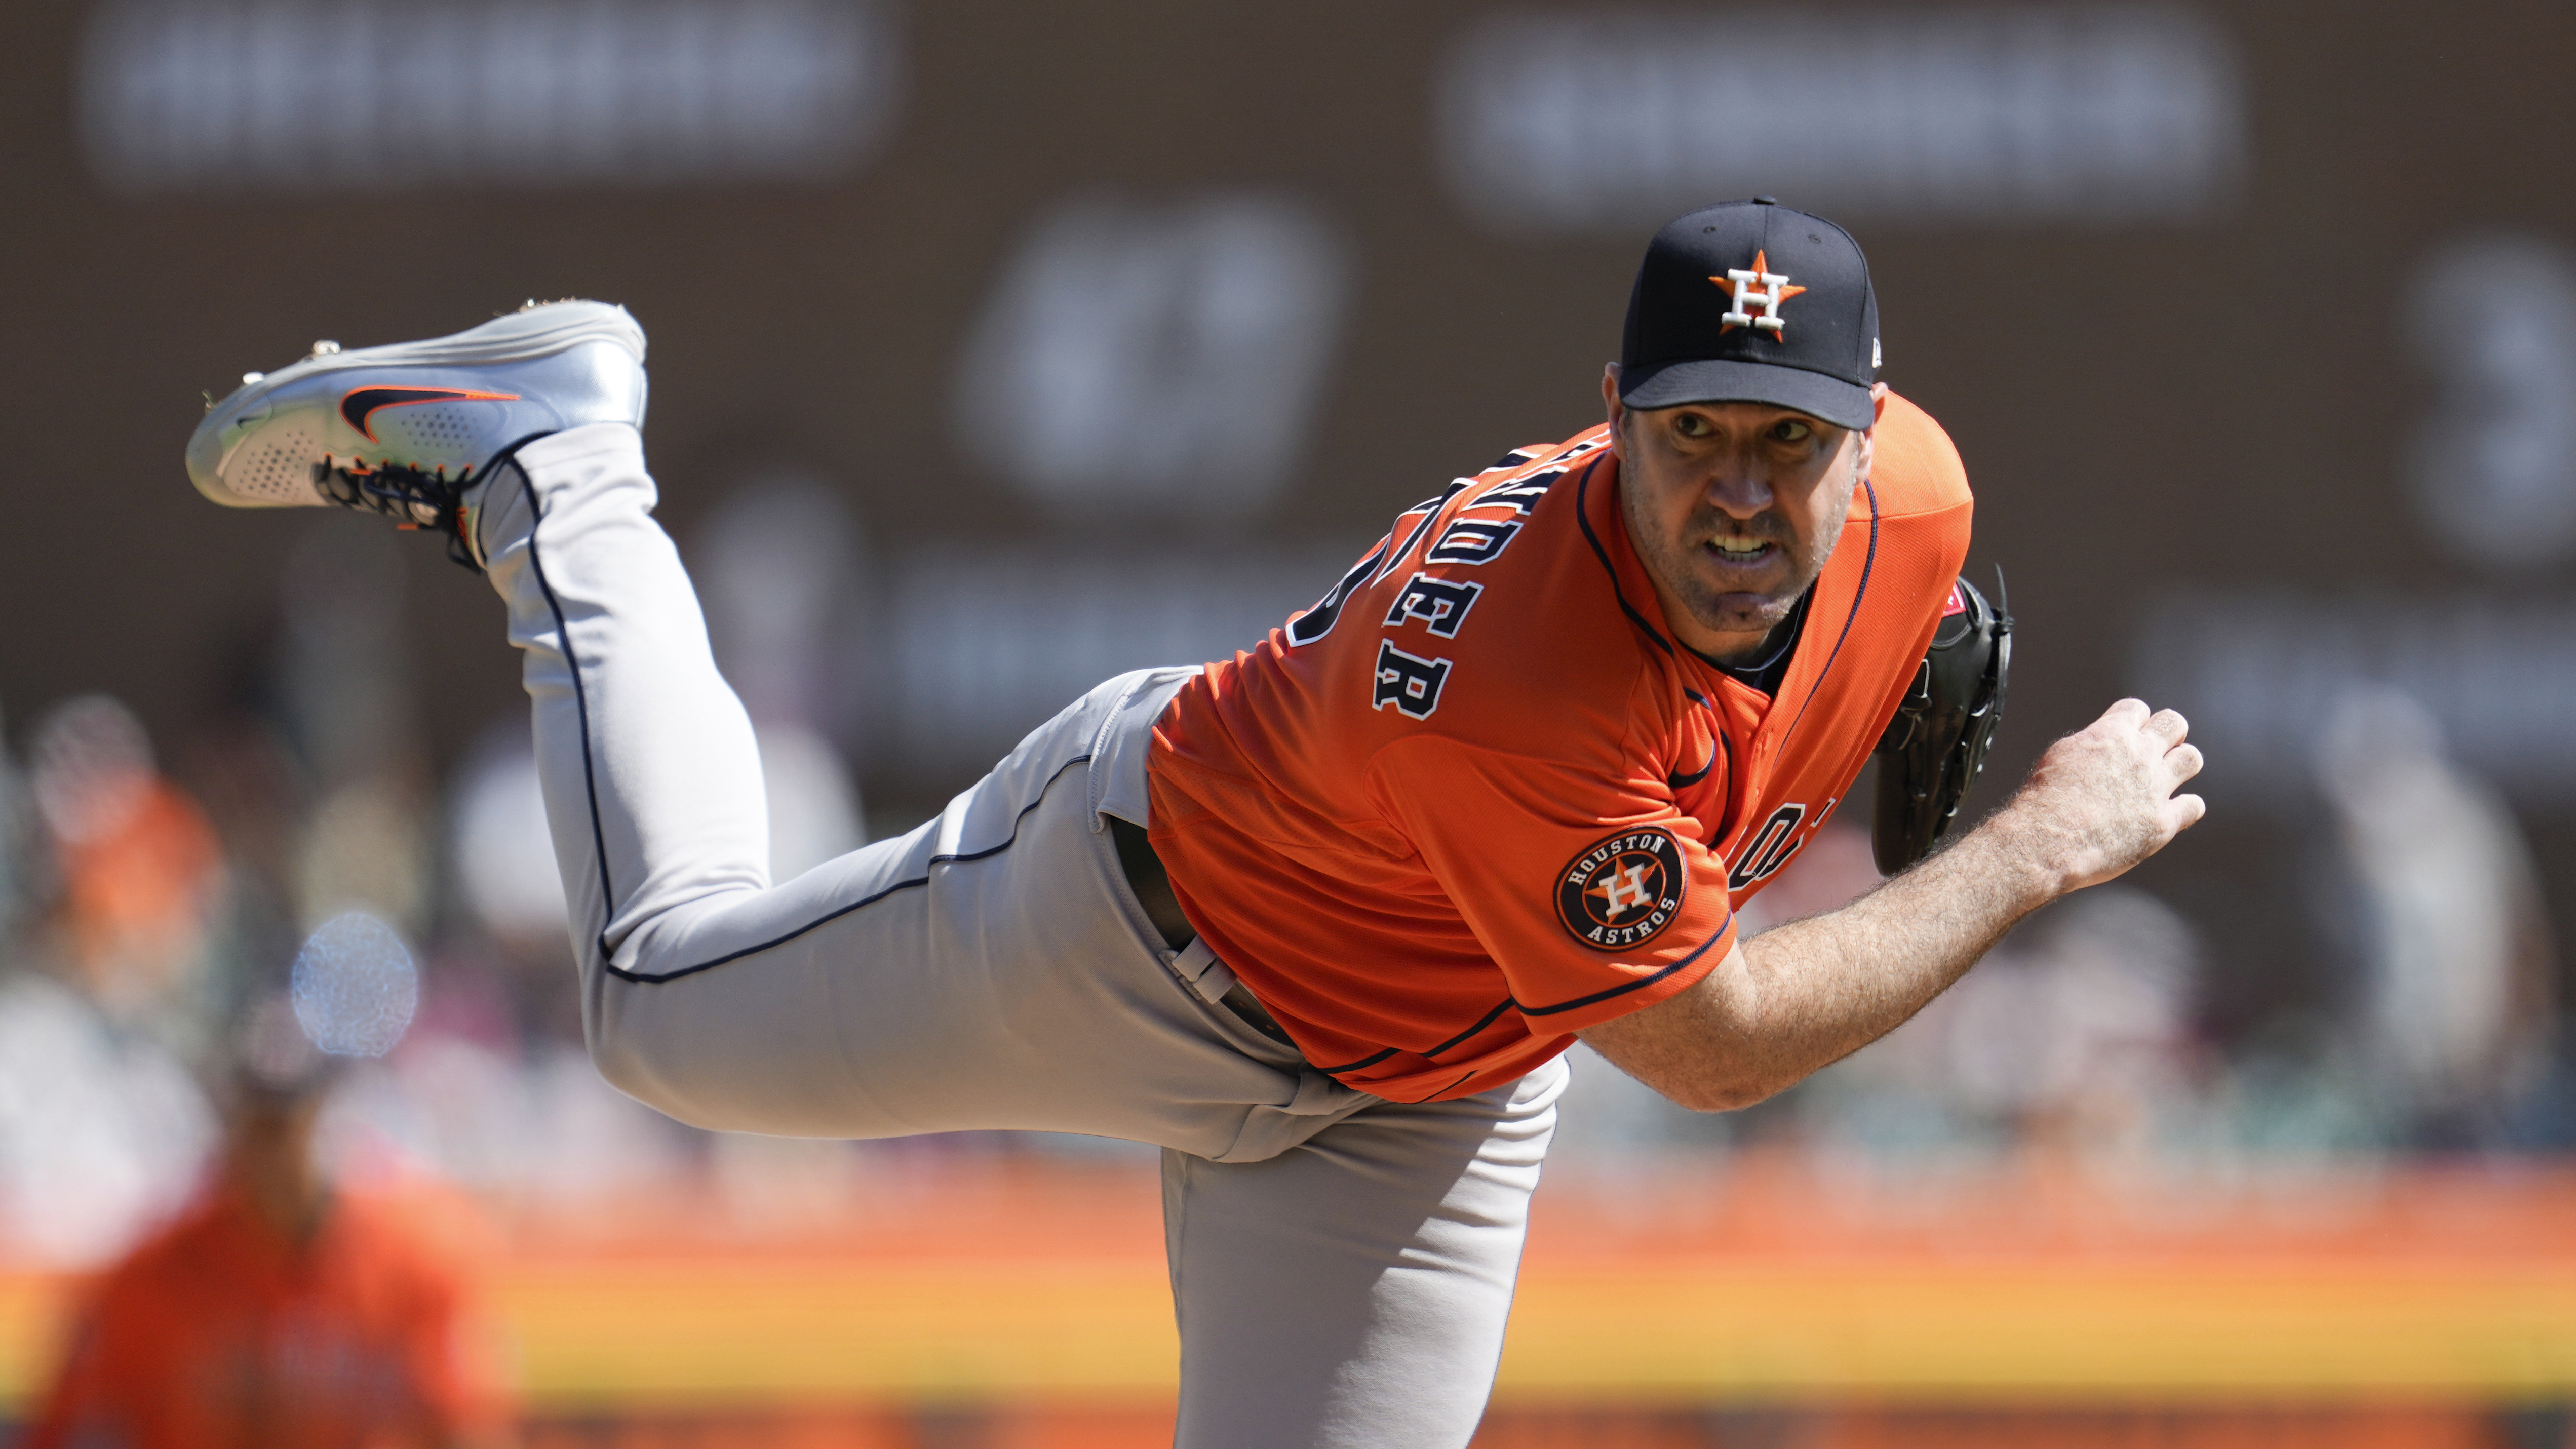 Detroit Tigers' Justin Verlander wins American League Cy Young in